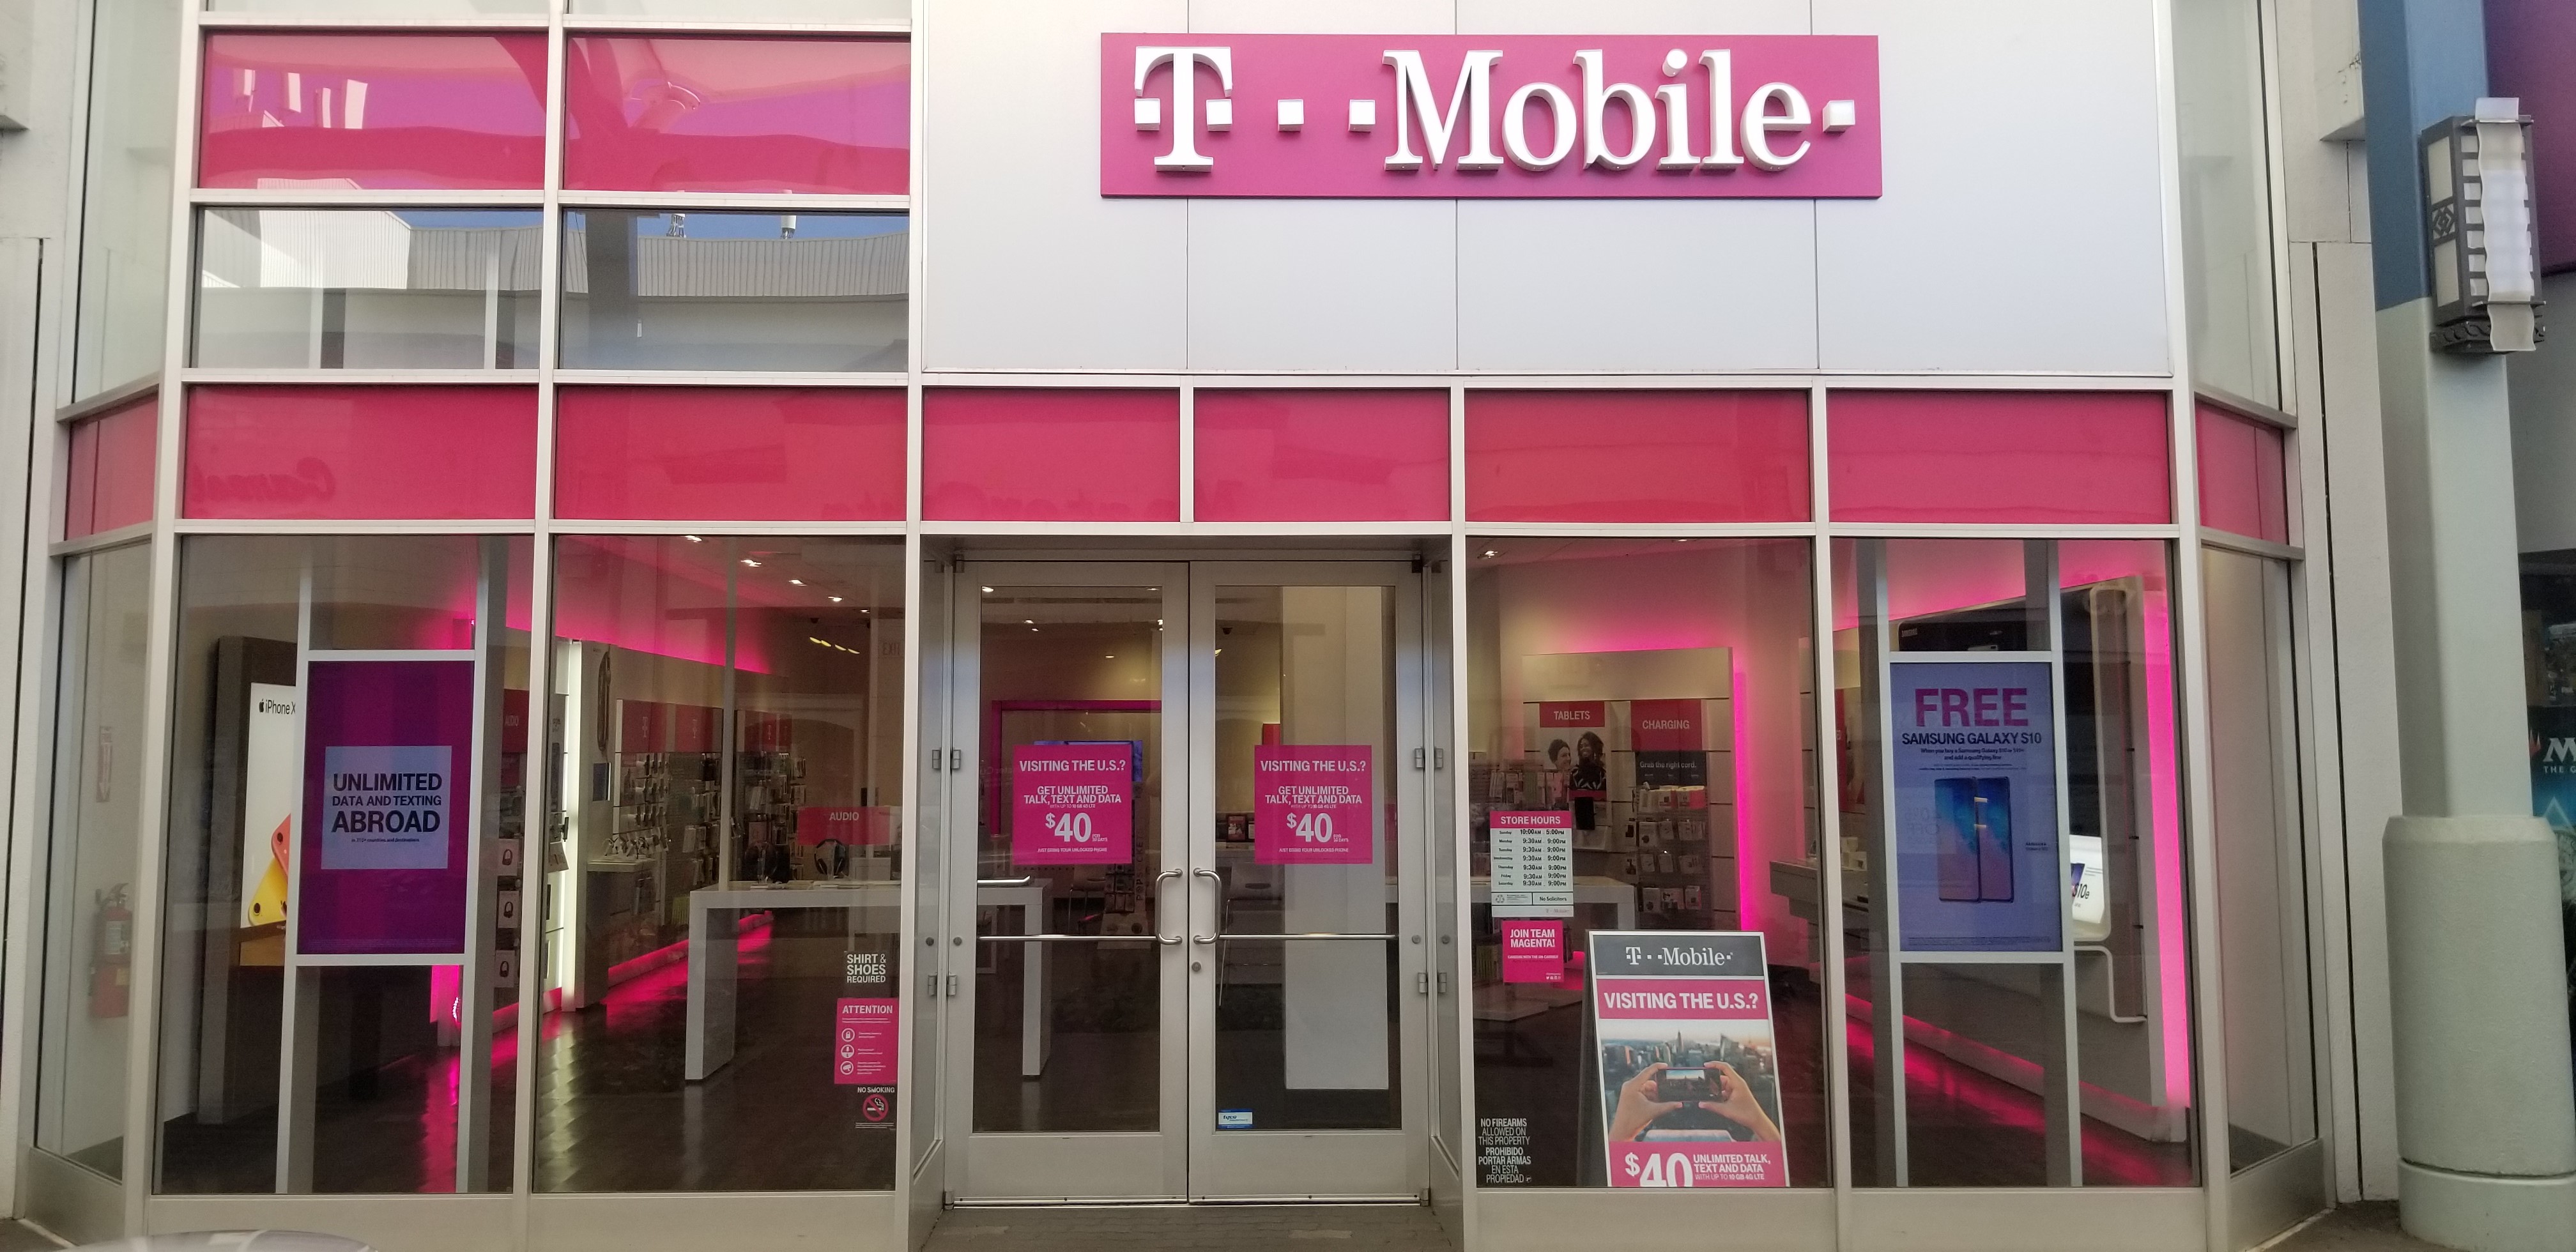 Kahului And Kihei Hawaii - Cell Phones, Plans, and Accessories at T-Mobile 275 W ...